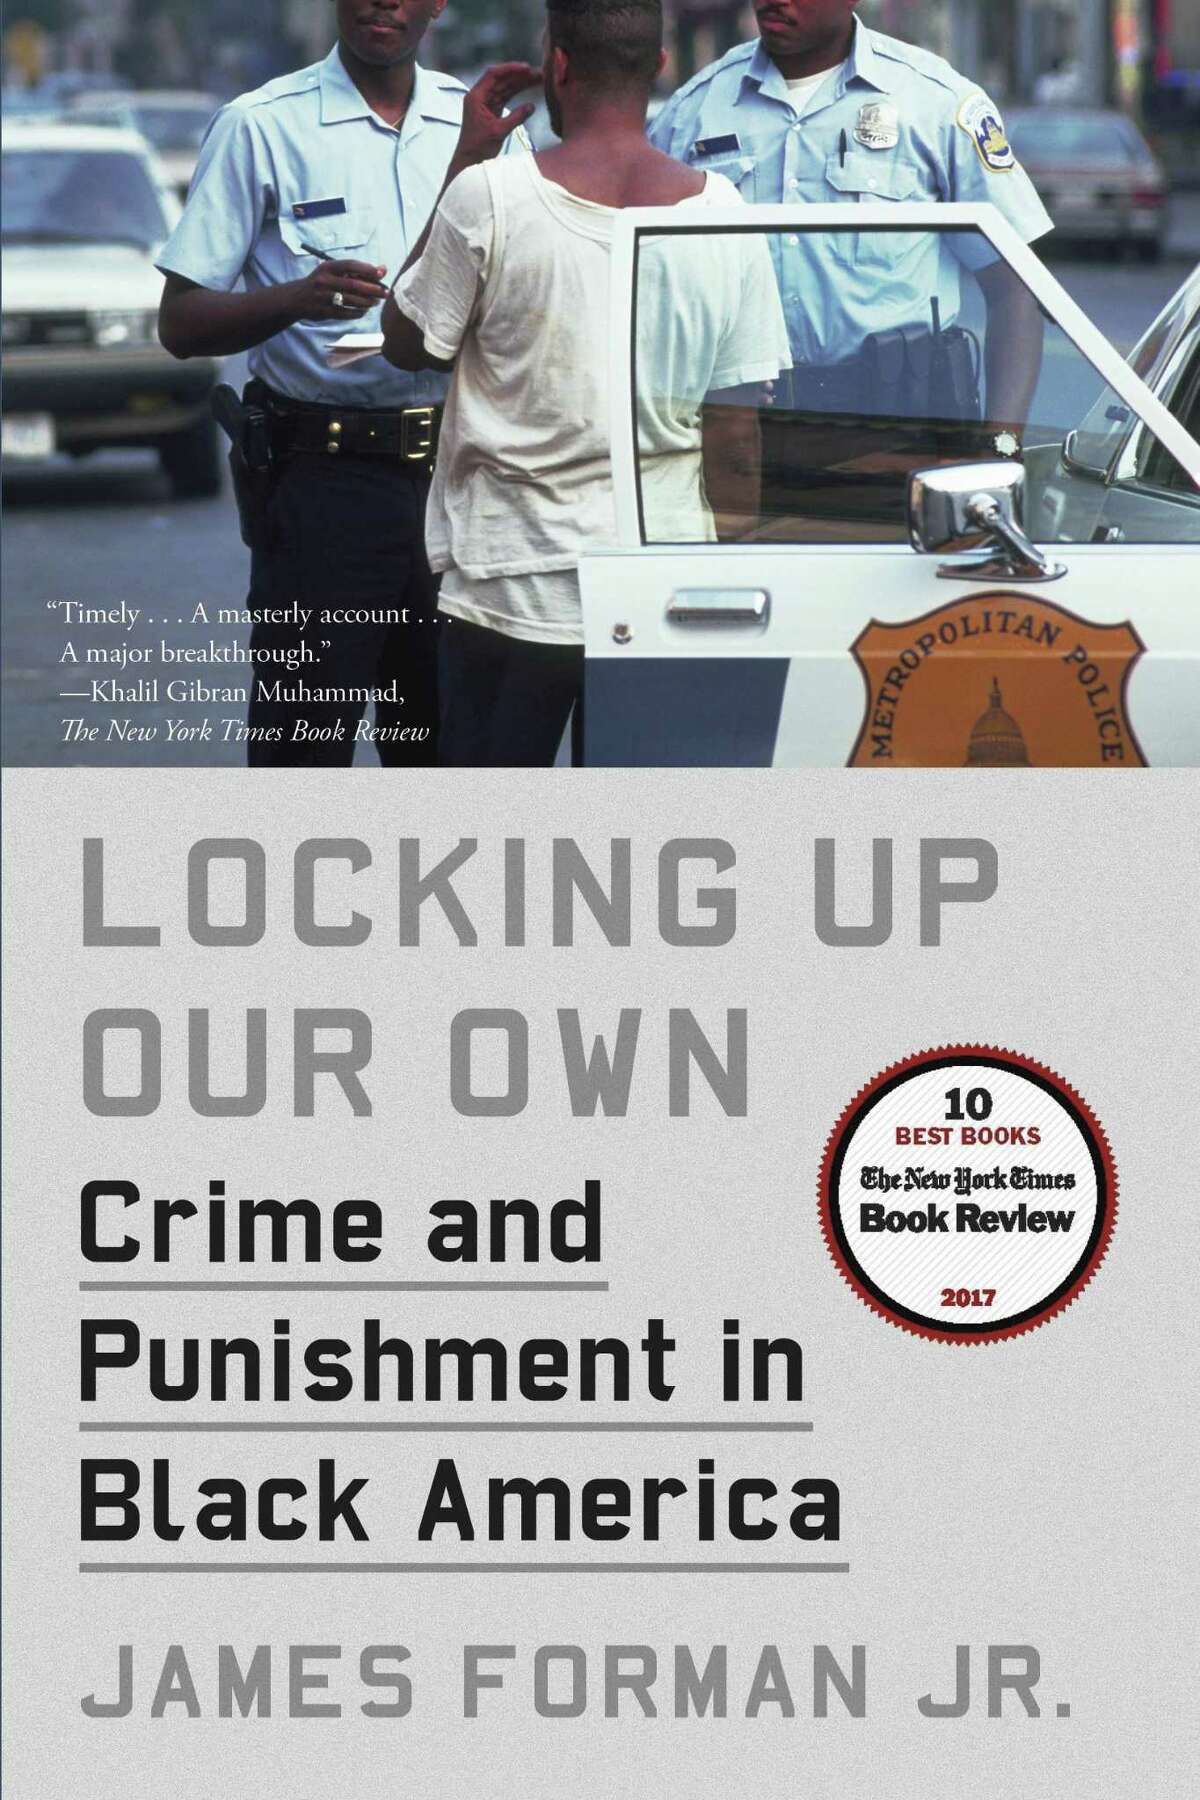 This cover image released by Farrar, Straus and Giroux shows "Locking Up Our Own: Crime and Punishment in Black America," by James Forman Jr. On Monday, April 16, 2018, Forman was awarded the Pulitzer Prize for general nonfiction. (Farrar, Straus and Giroux via AP)